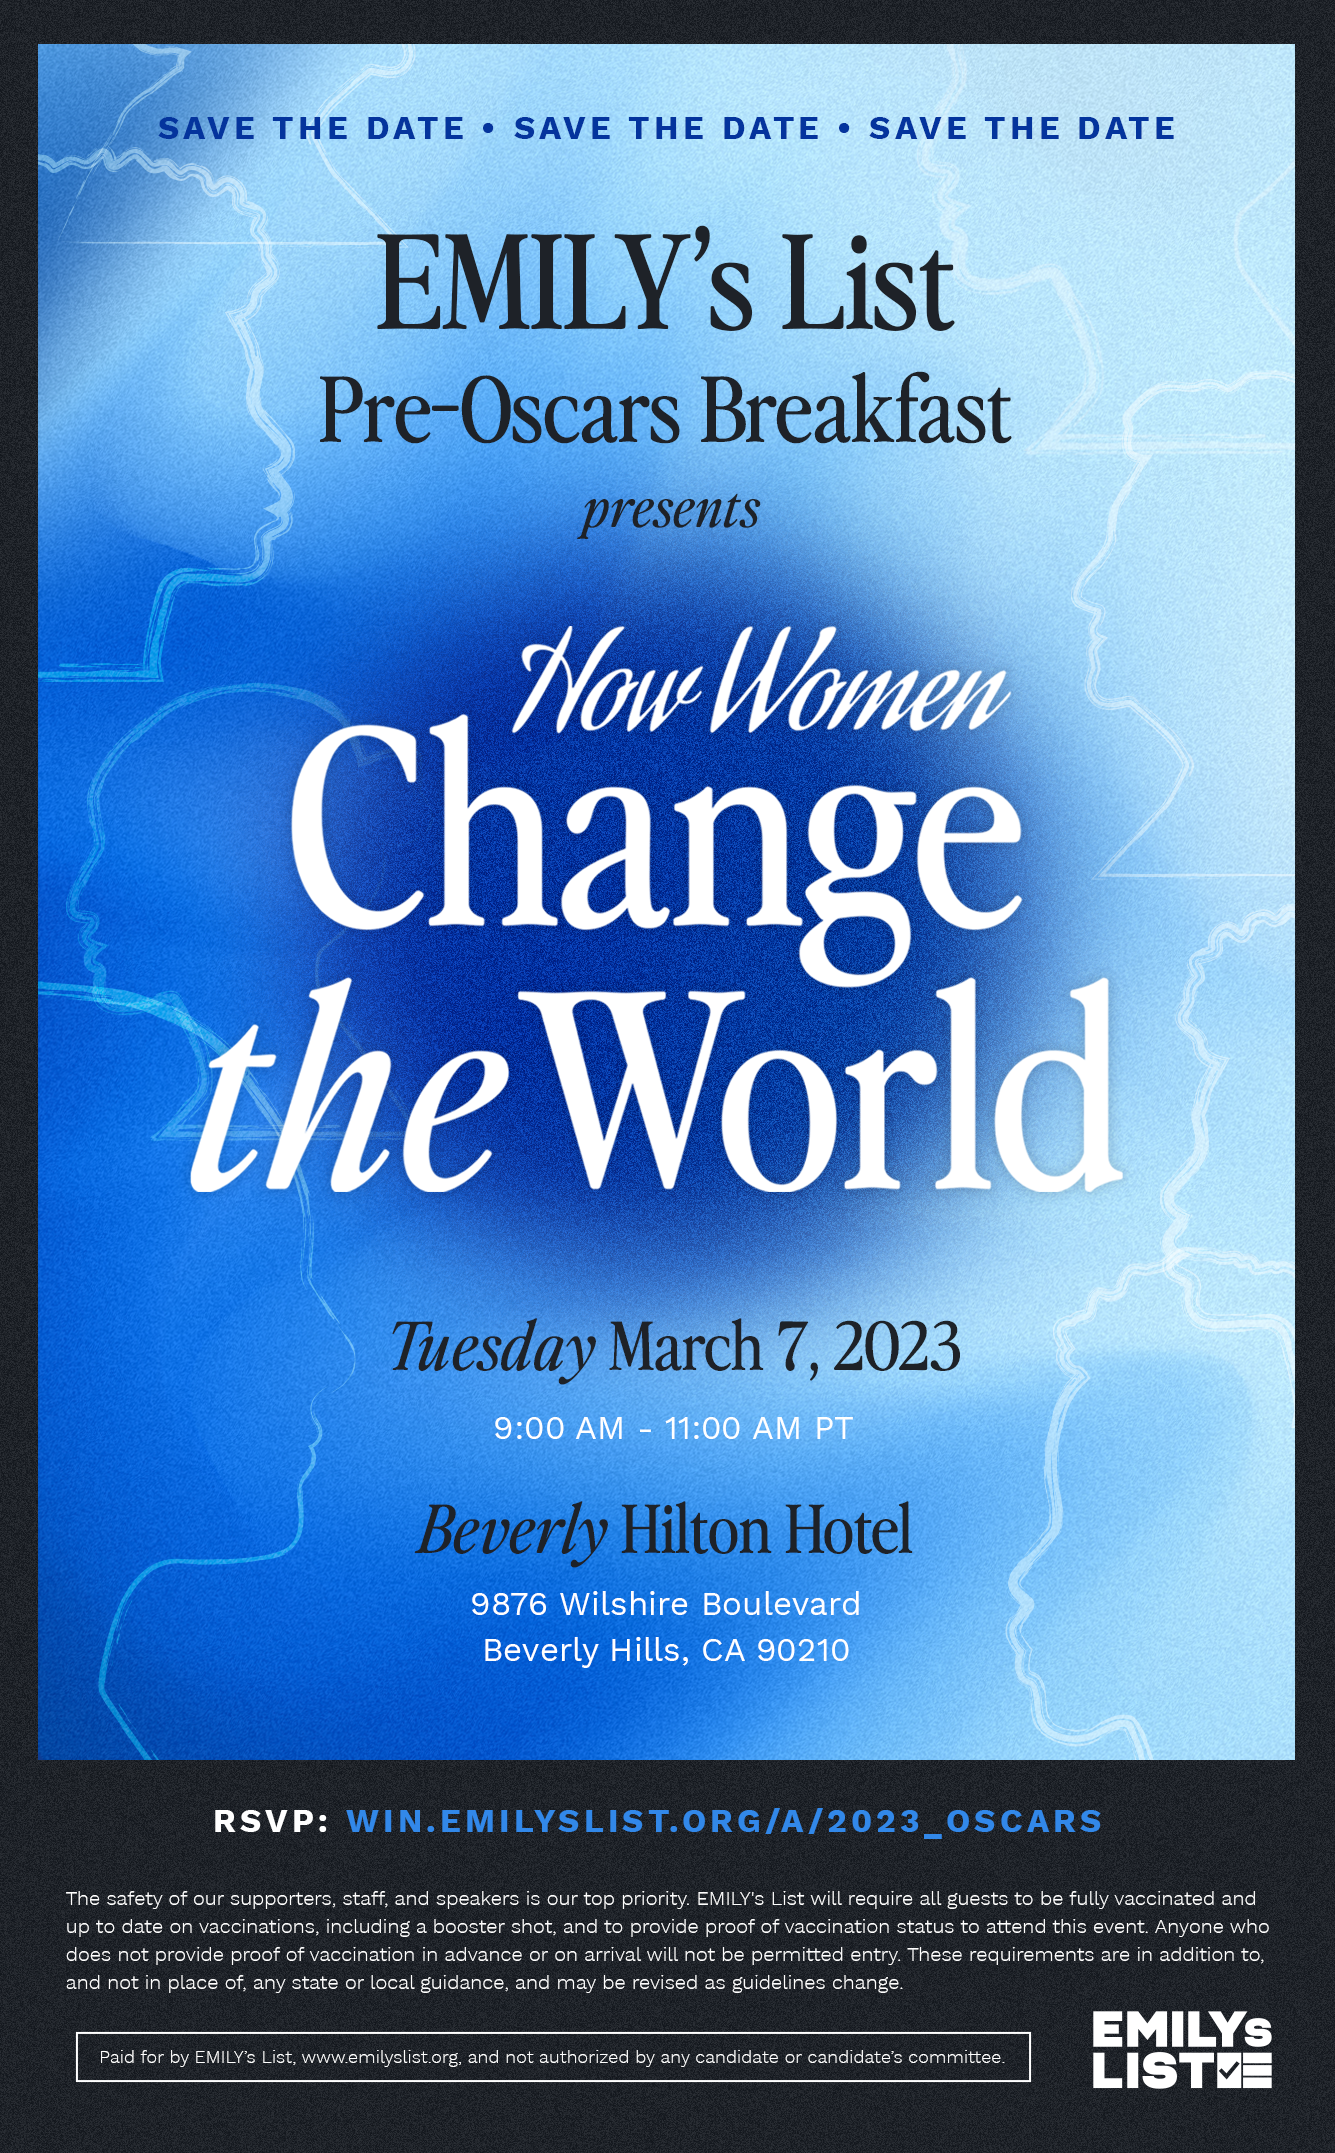 Save The Date: EMILYs List Pre-Oscars Breakfast presents How Women Change the World